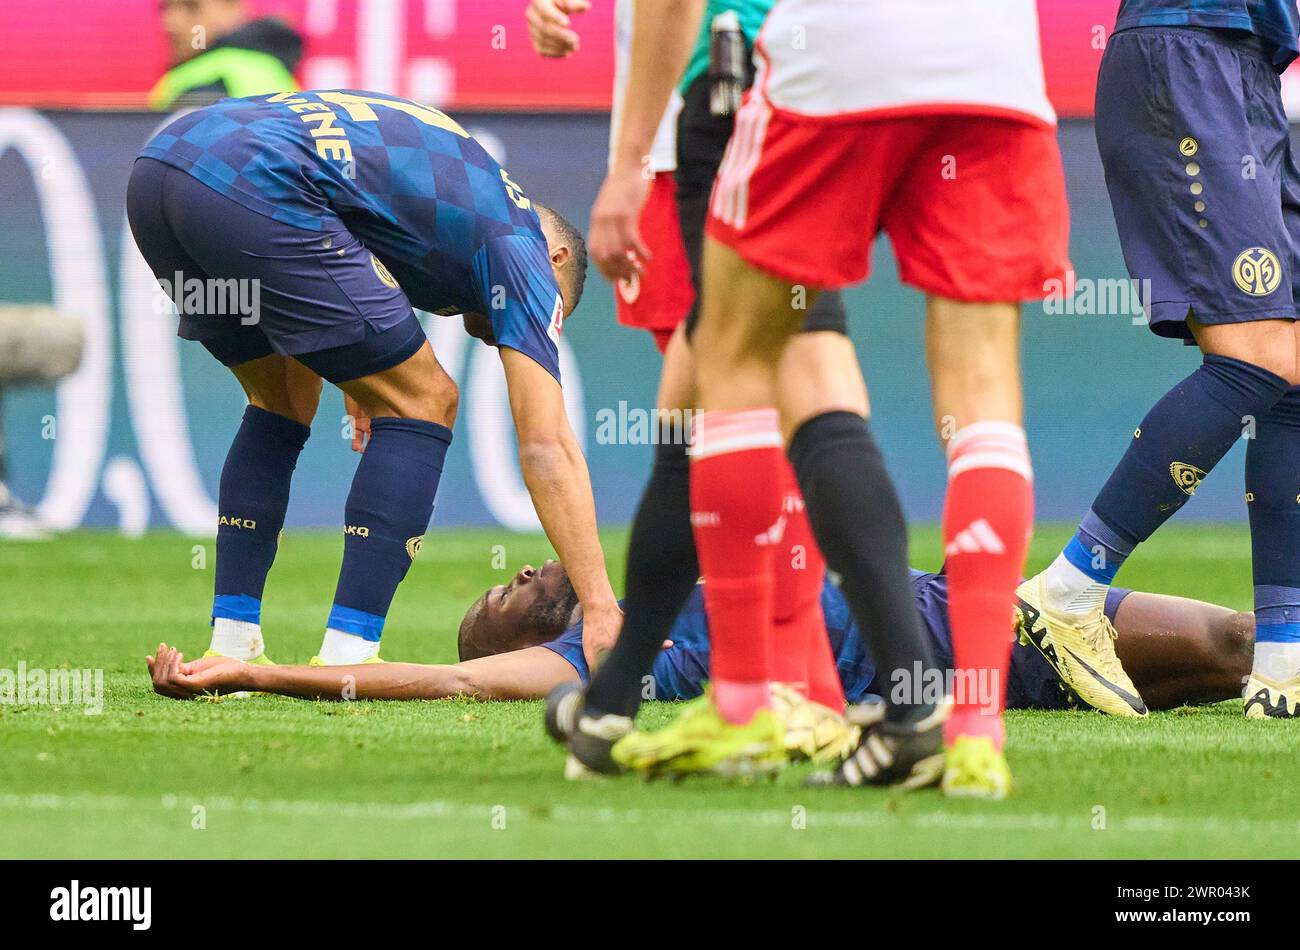 Joshua Guilavogu, MZ 23 head injury   in the match  FC BAYERN MUENCHEN - FSV MAINZ 05 8-1   on Mar 9, 2024 in Munich, Germany. Season 2023/2024, 1.Bundesliga, FCB,, München, matchday 25, 25.Spieltag © Peter Schatz / Alamy Live News    - DFL REGULATIONS PROHIBIT ANY USE OF PHOTOGRAPHS as IMAGE SEQUENCES and/or QUASI-VIDEO - Stock Photo